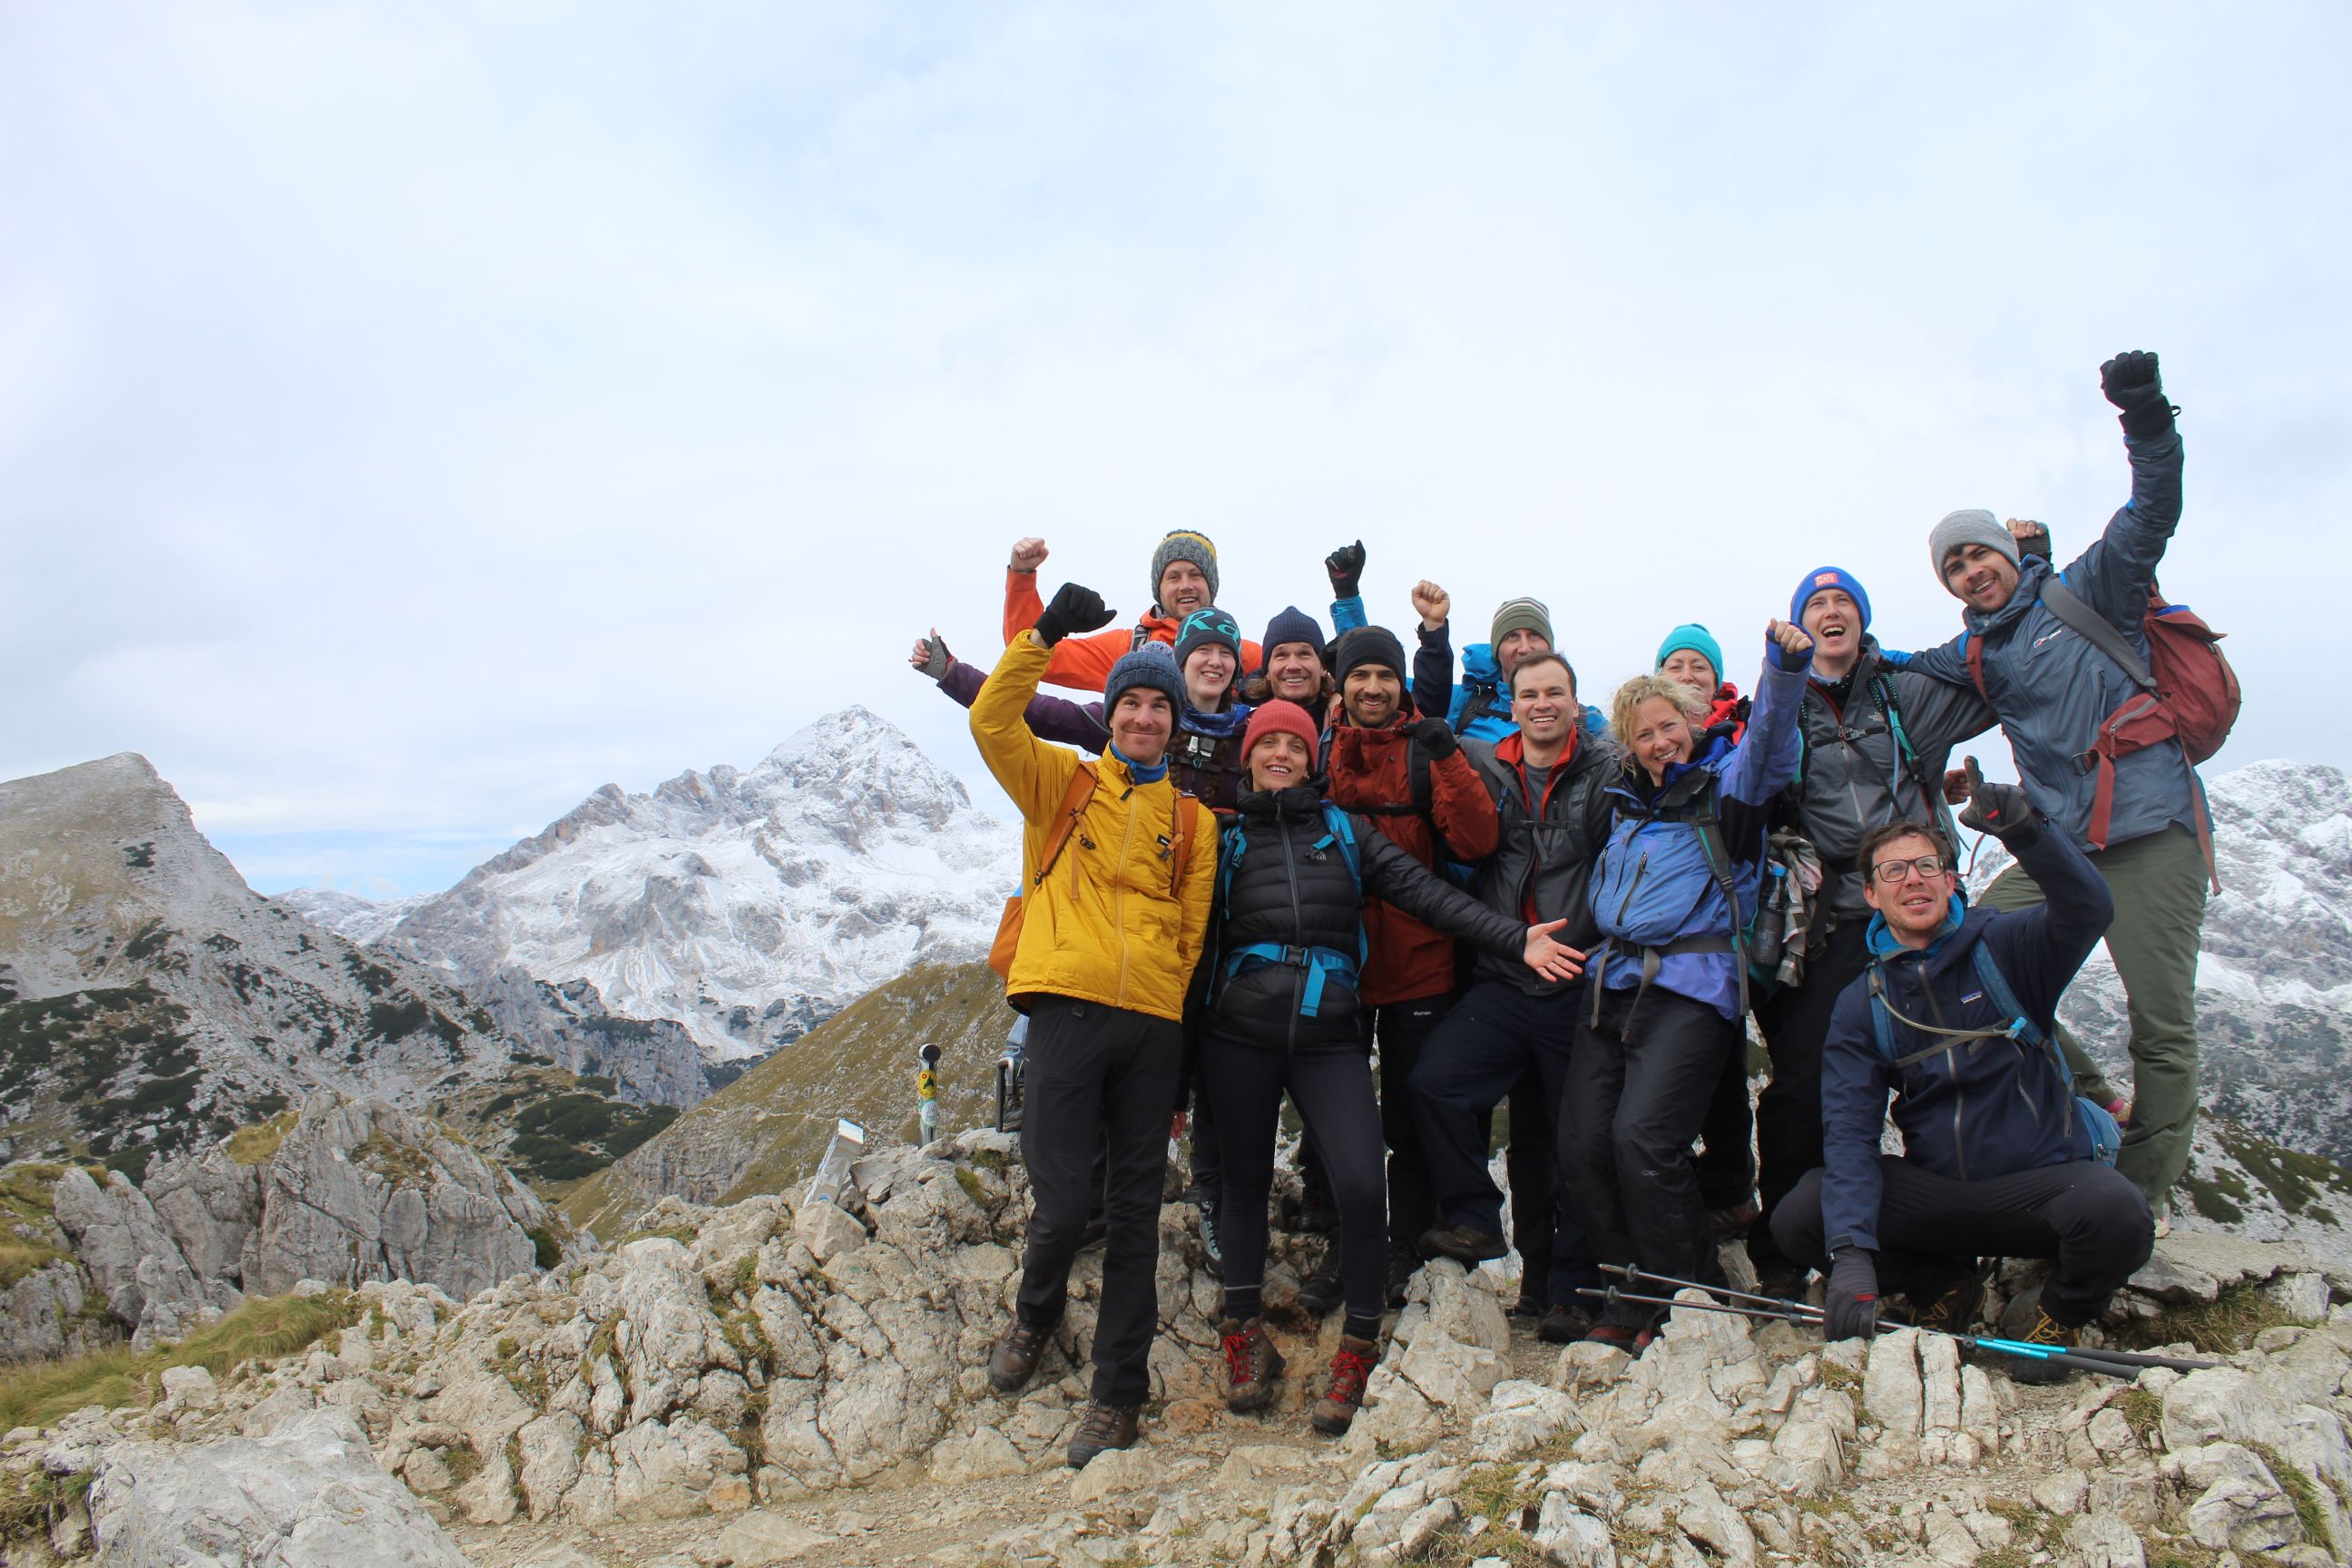 The Much Better Adventures staff team pose at the top of Viševnik, a mountain in Slovenia.